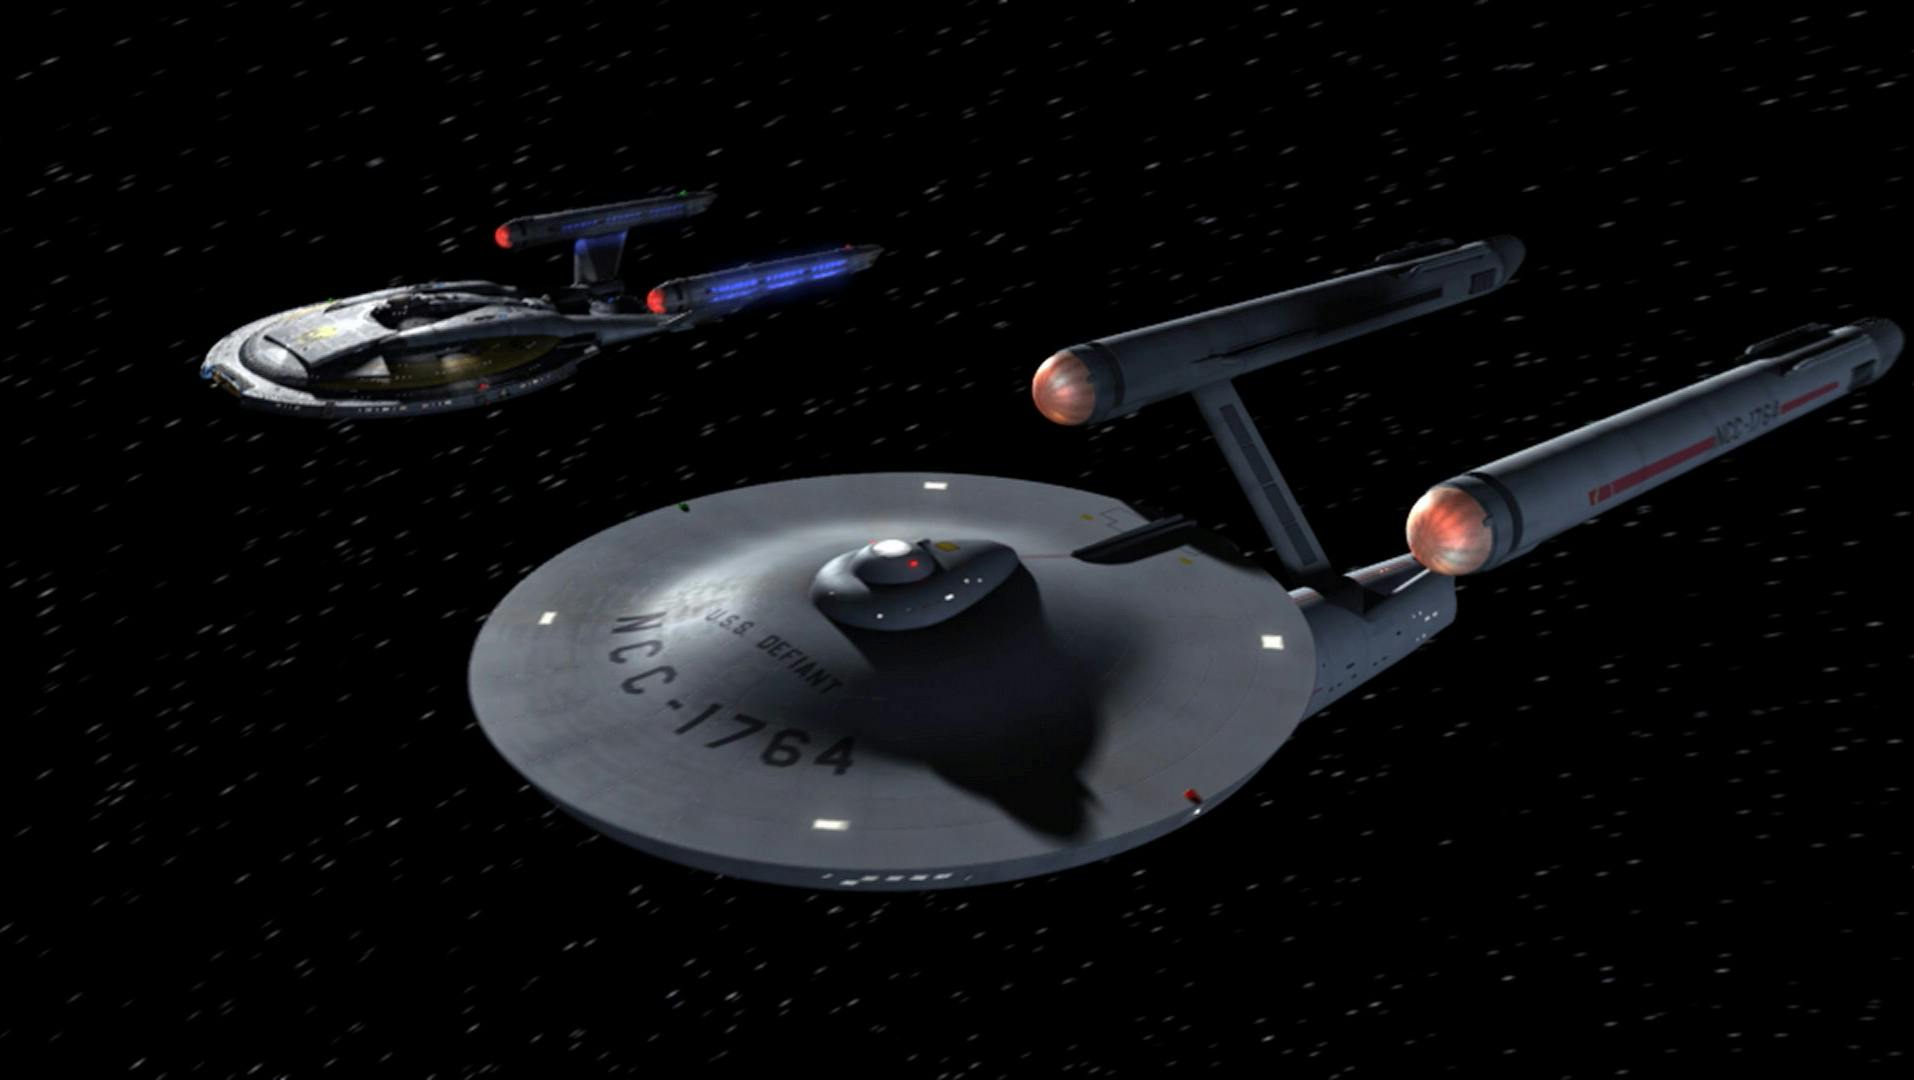 The U.S.S. Defiant NCC-1764 next to the I.S.S. Enterprise in 'In A Mirror Darkly, Part 2'